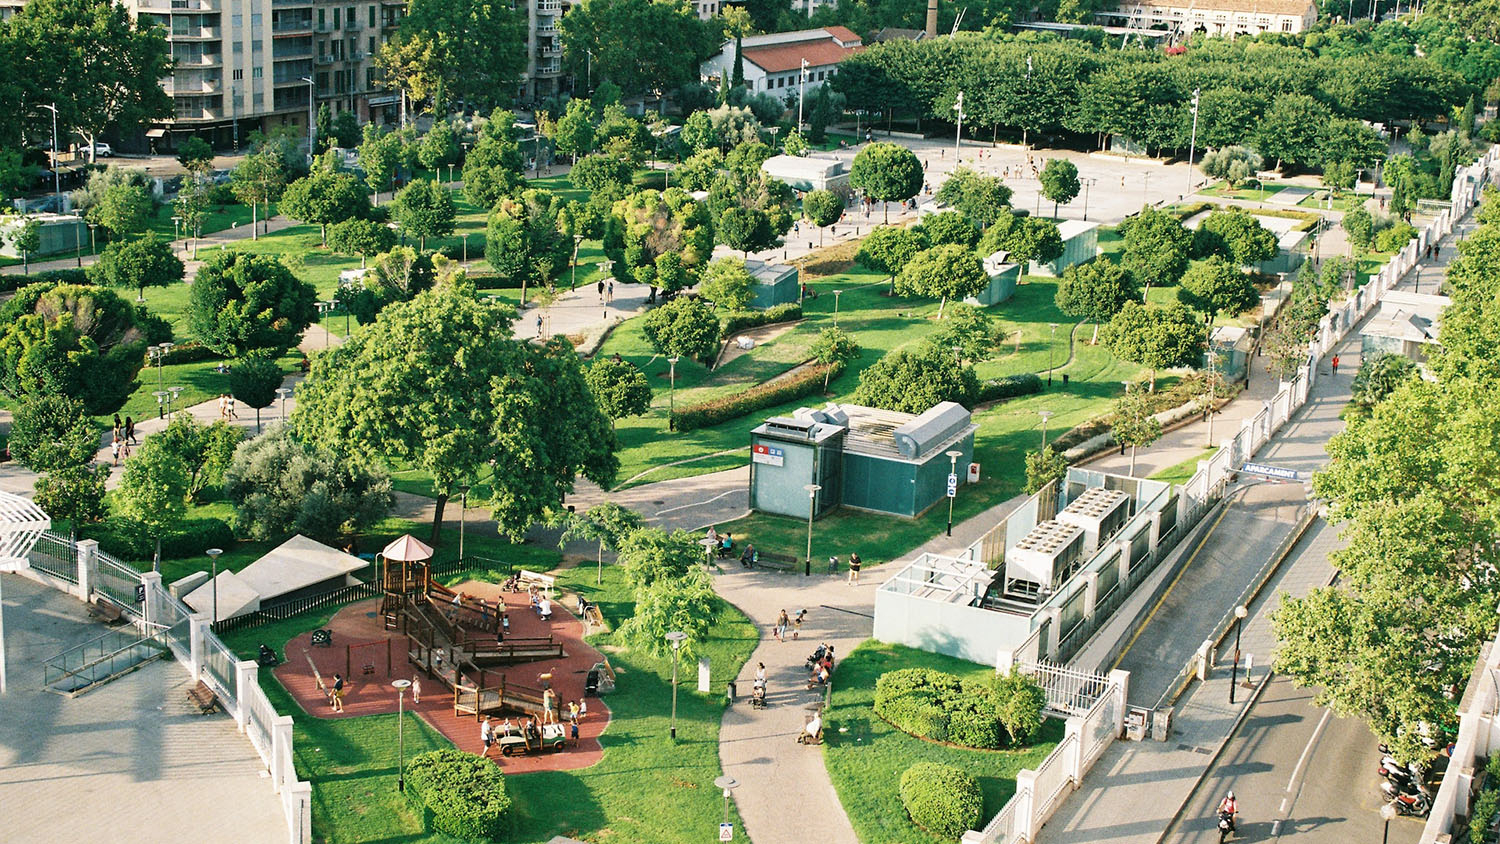 photograph is an aerial view of a city neighborhood, with busy streets running on either side of a park. The park has many trees, and there are large apartment and office buildings in the background.